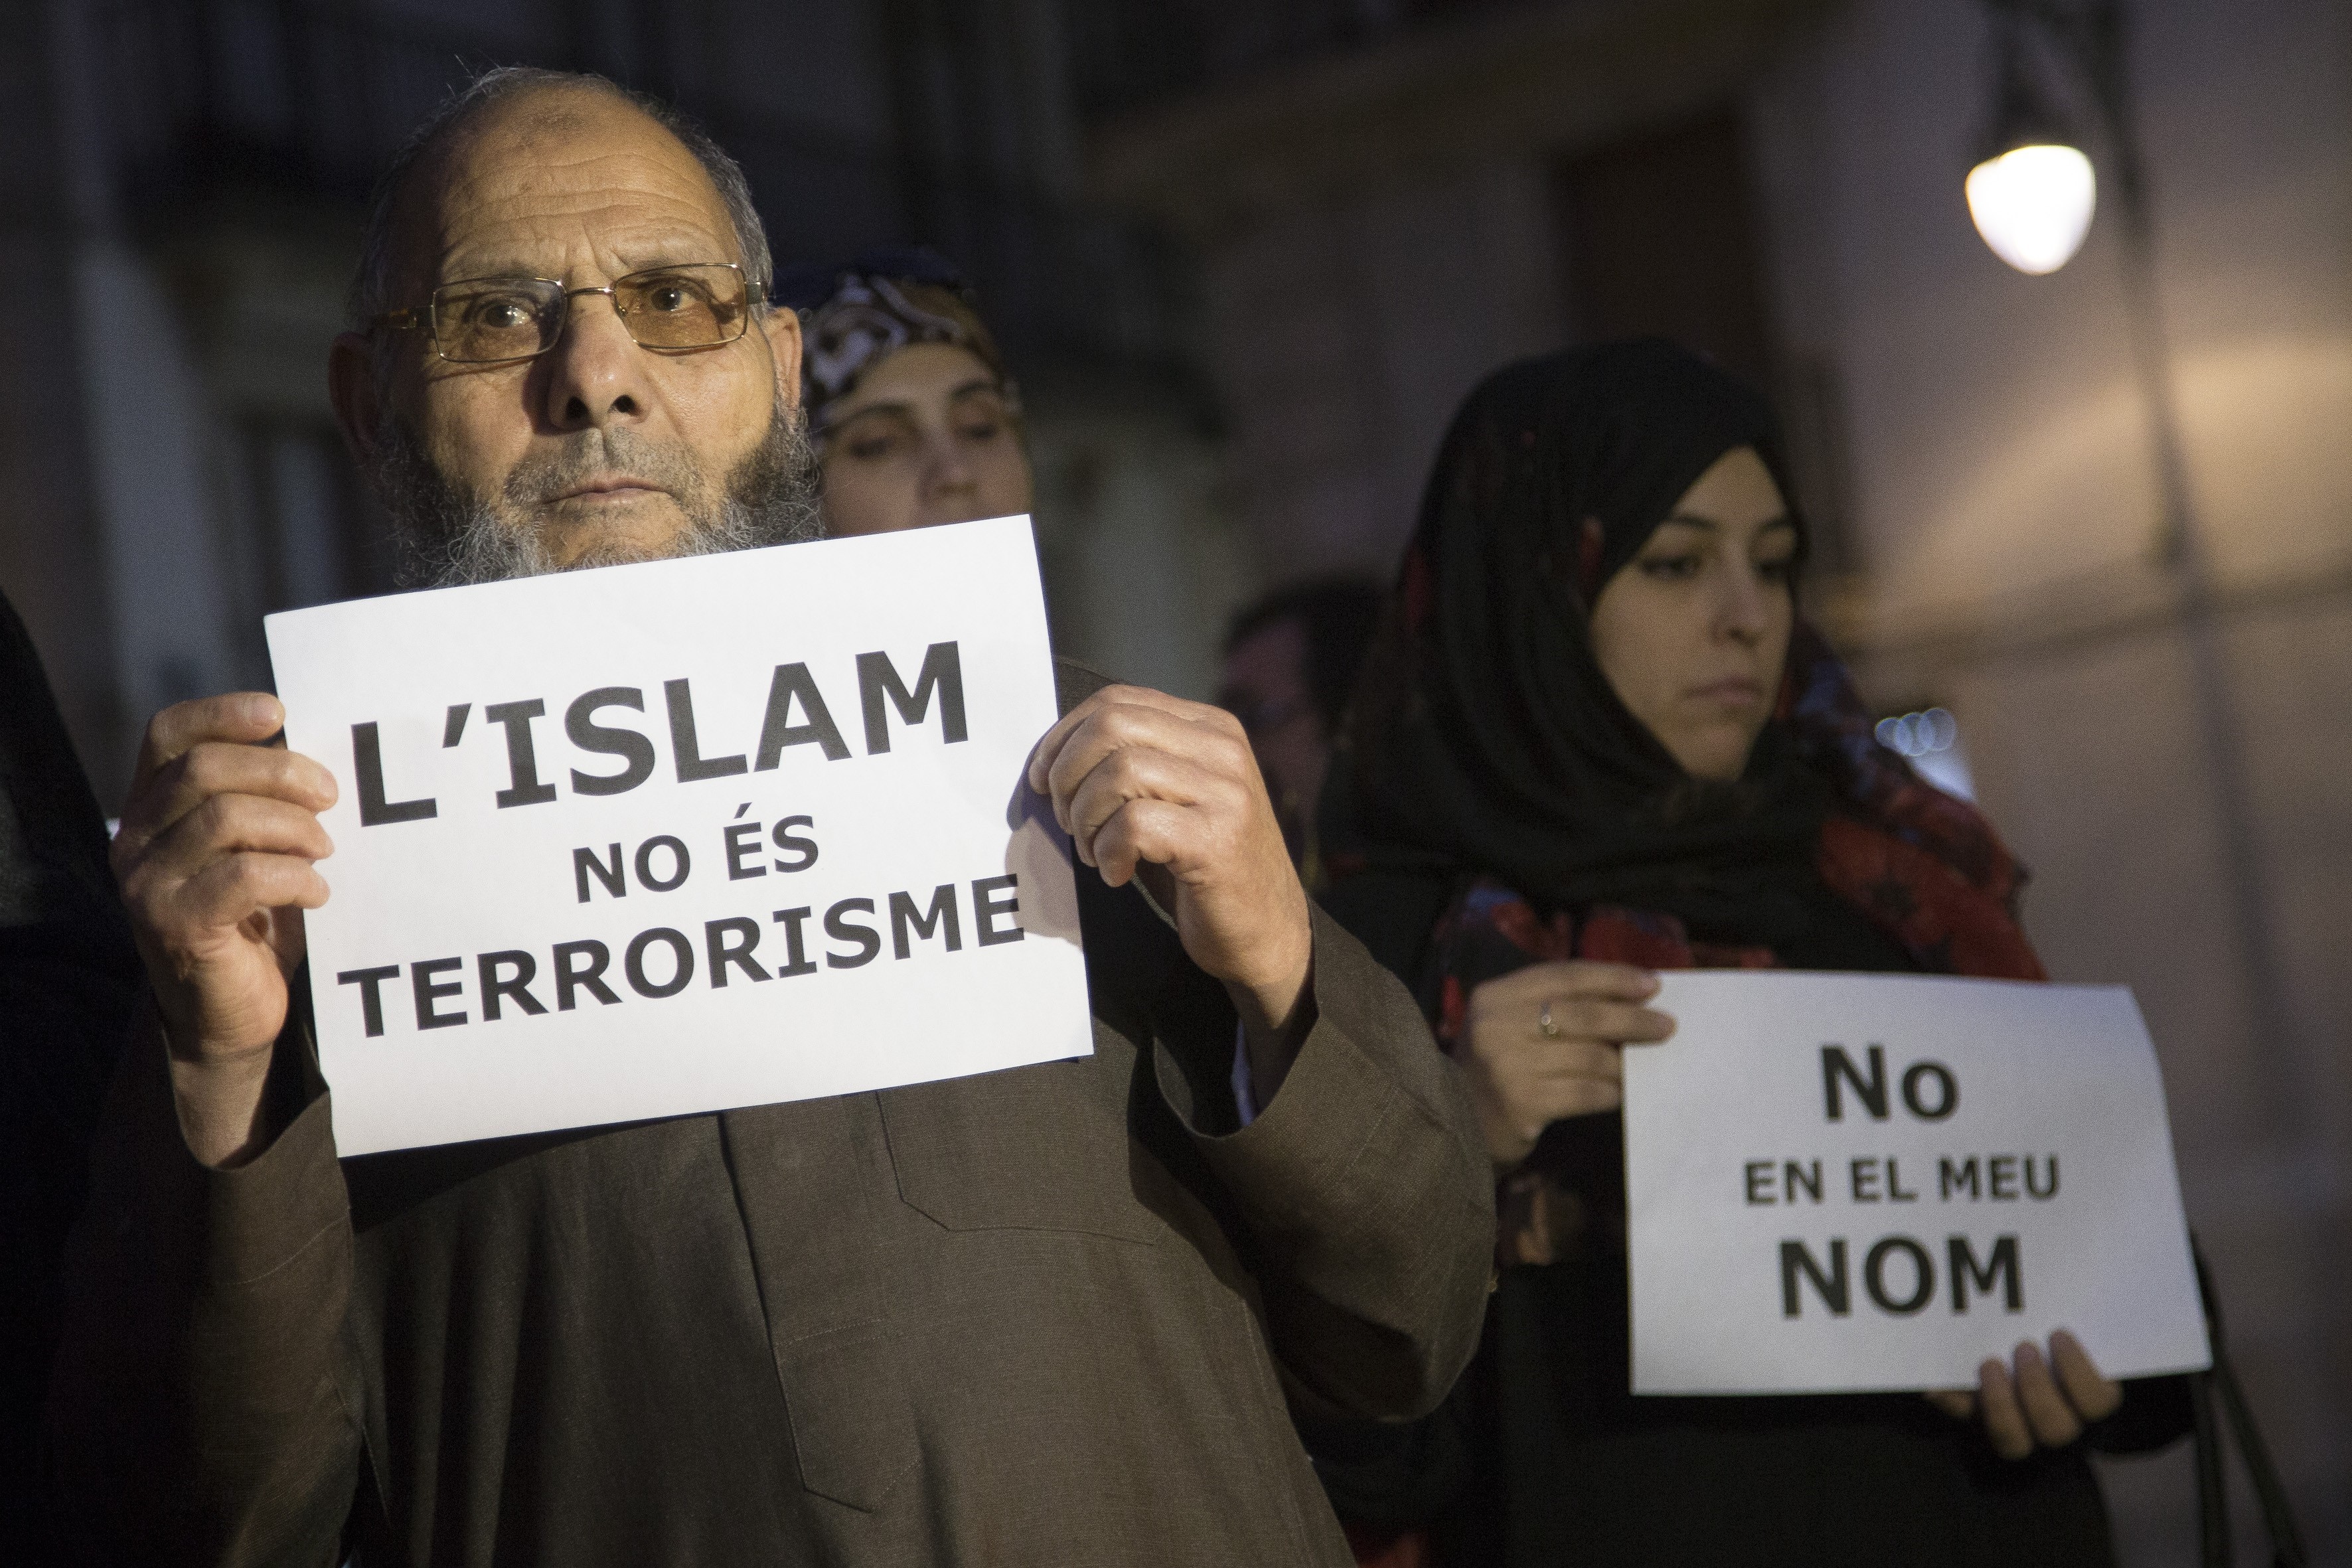 Muslims from Barcelona gather to condemn the terror attacks in Paris in Barcelona, Spain on Nov. 16, 2015. (Albert Llop—Getty Images)